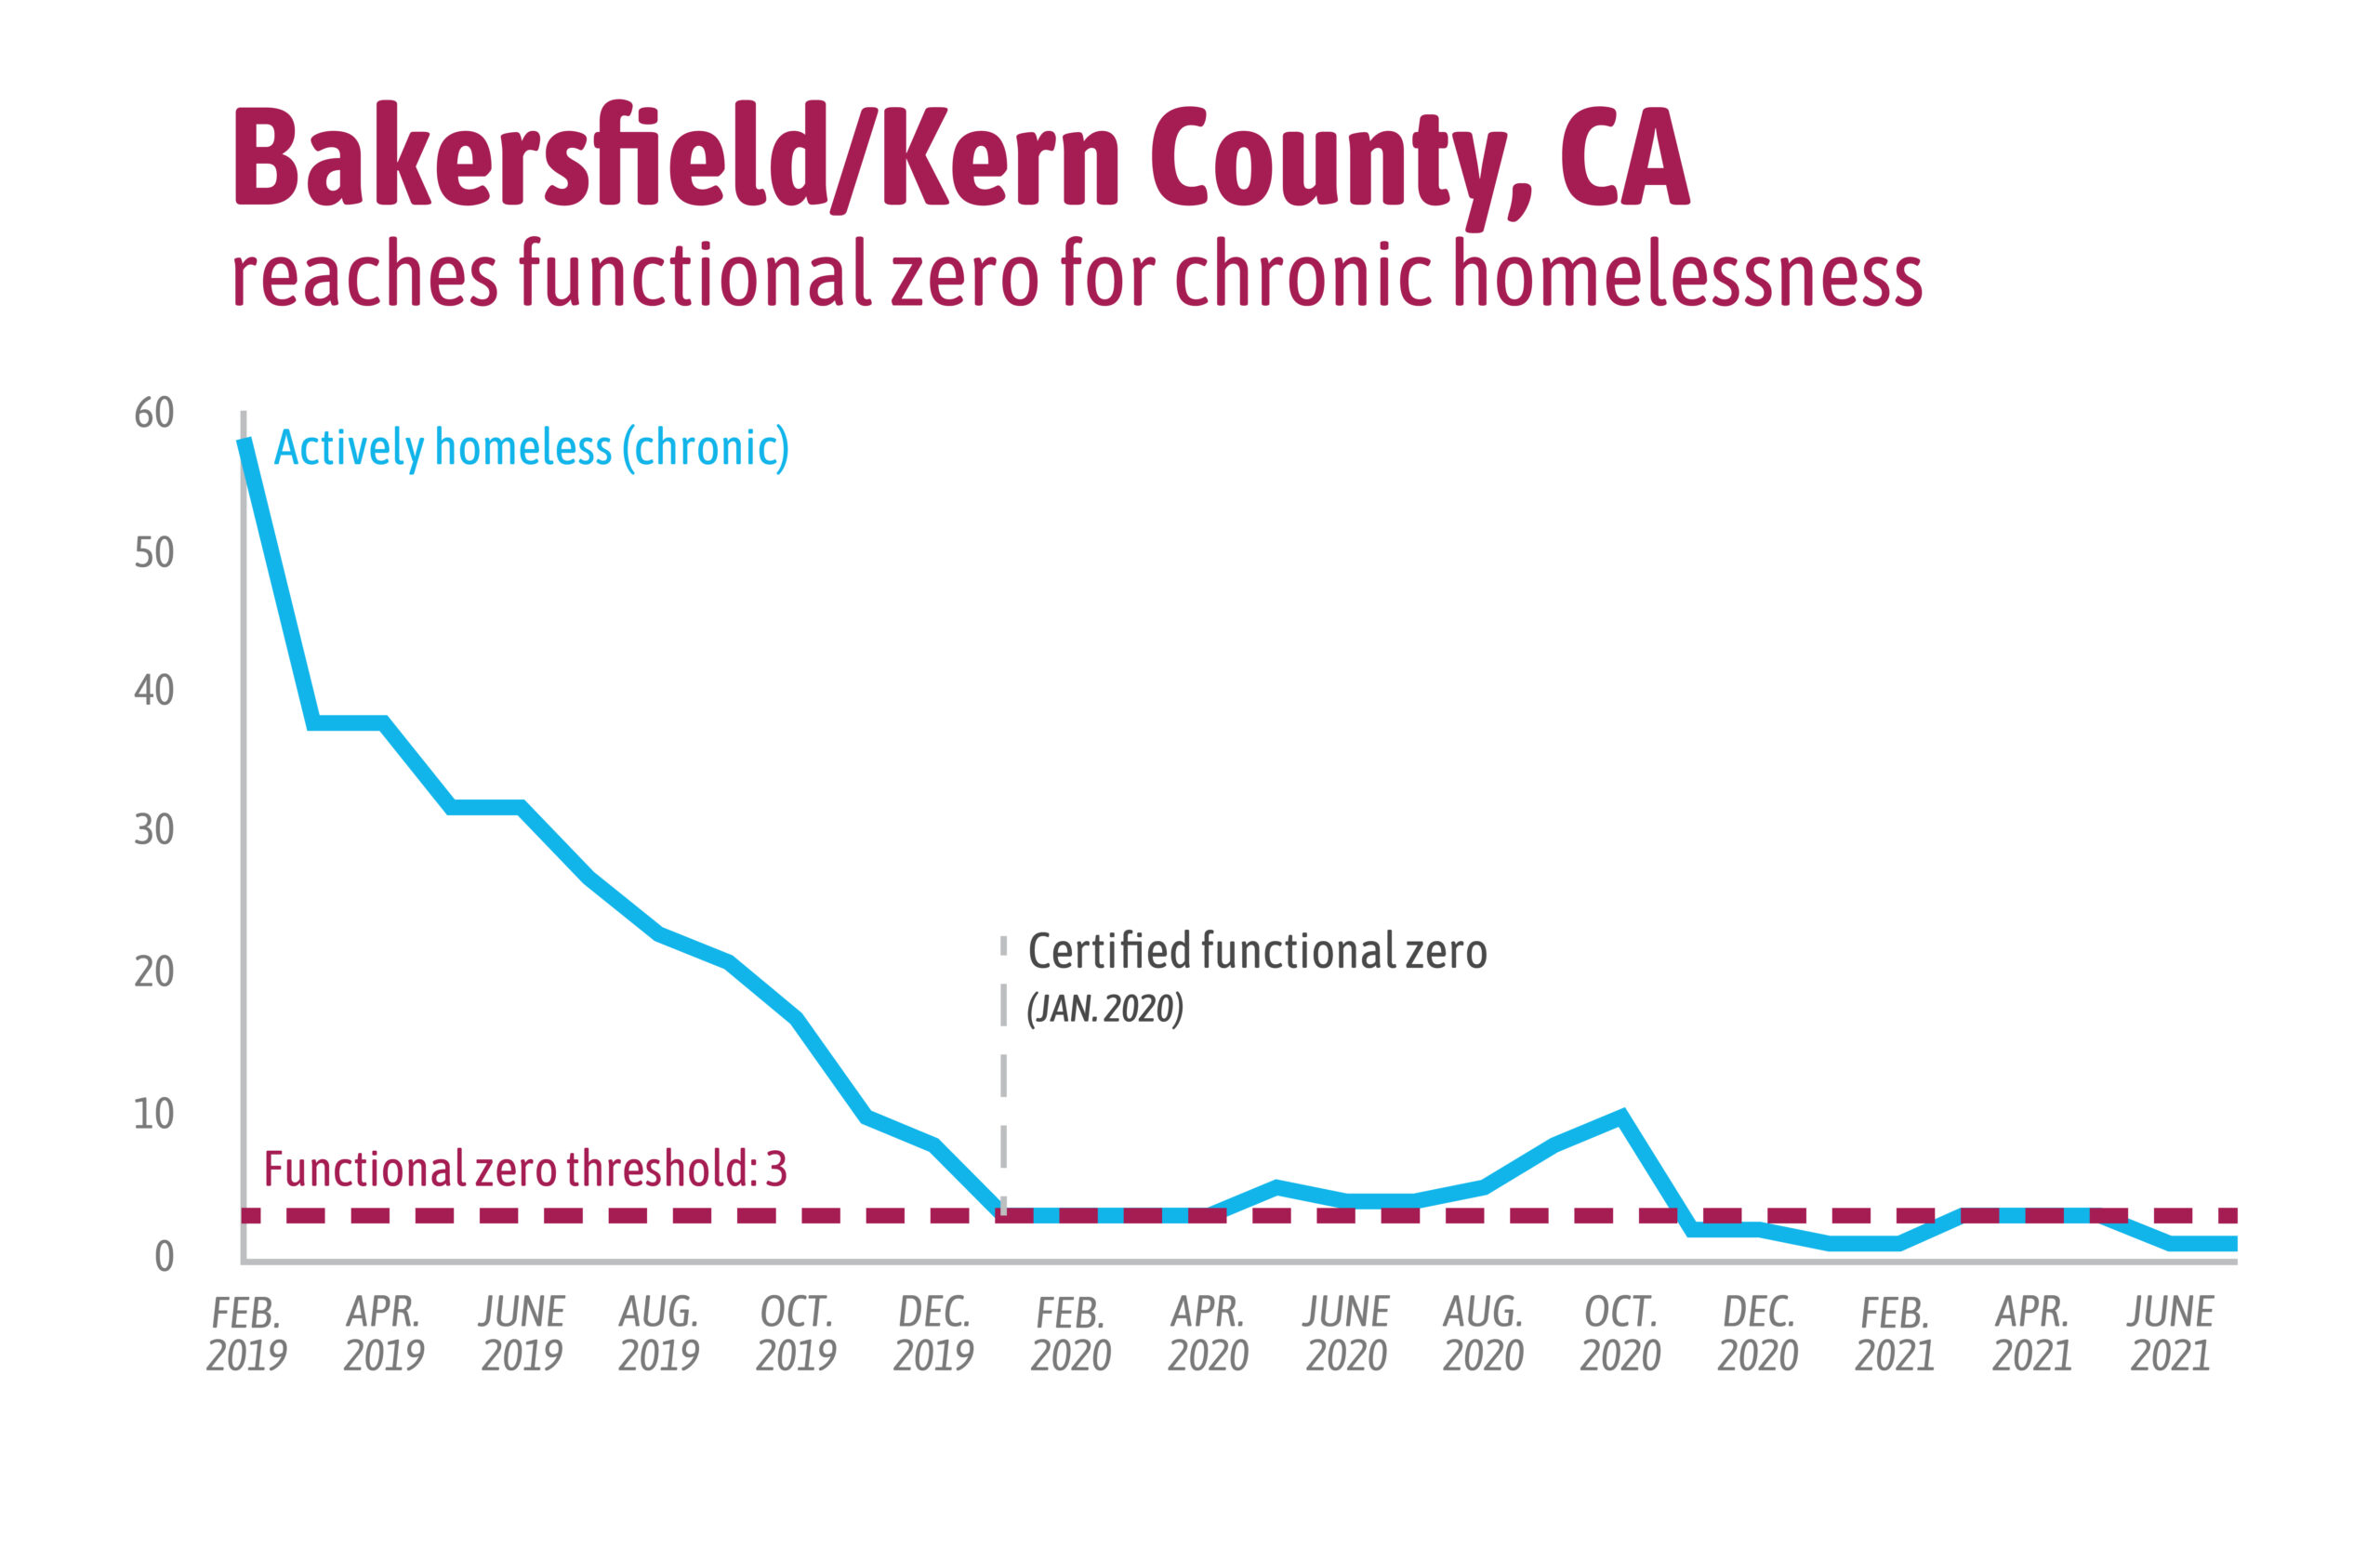 Bakersfield/Kern County, California, reached functional zero for chronic homelessness and sustained this progress.